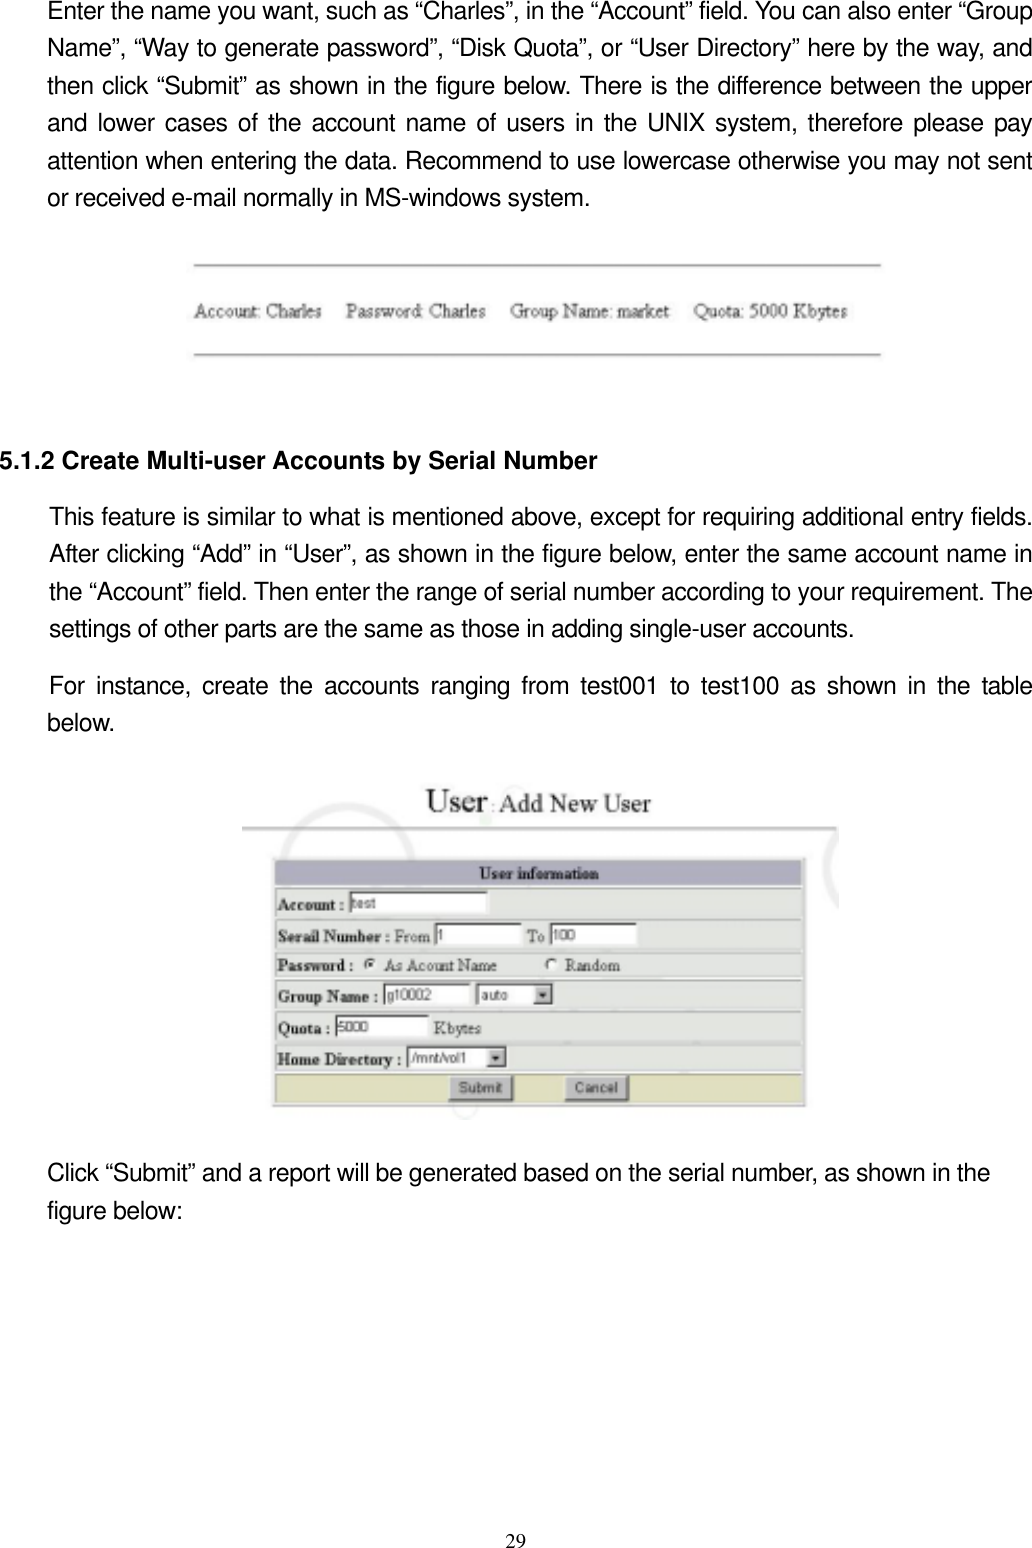  29Enter the name you want, such as “Charles”, in the “Account” field. You can also enter “Group Name”, “Way to generate password”, “Disk Quota”, or “User Directory” here by the way, and then click “Submit” as shown in the figure below. There is the difference between the upper and lower cases of the account name of users in the UNIX system, therefore please pay attention when entering the data. Recommend to use lowercase otherwise you may not sent or received e-mail normally in MS-windows system.   5.1.2 Create Multi-user Accounts by Serial Number This feature is similar to what is mentioned above, except for requiring additional entry fields. After clicking “Add” in “User”, as shown in the figure below, enter the same account name in the “Account” field. Then enter the range of serial number according to your requirement. The settings of other parts are the same as those in adding single-user accounts.   For instance, create the accounts ranging from test001 to test100 as shown in the table below.   Click “Submit” and a report will be generated based on the serial number, as shown in the figure below:   